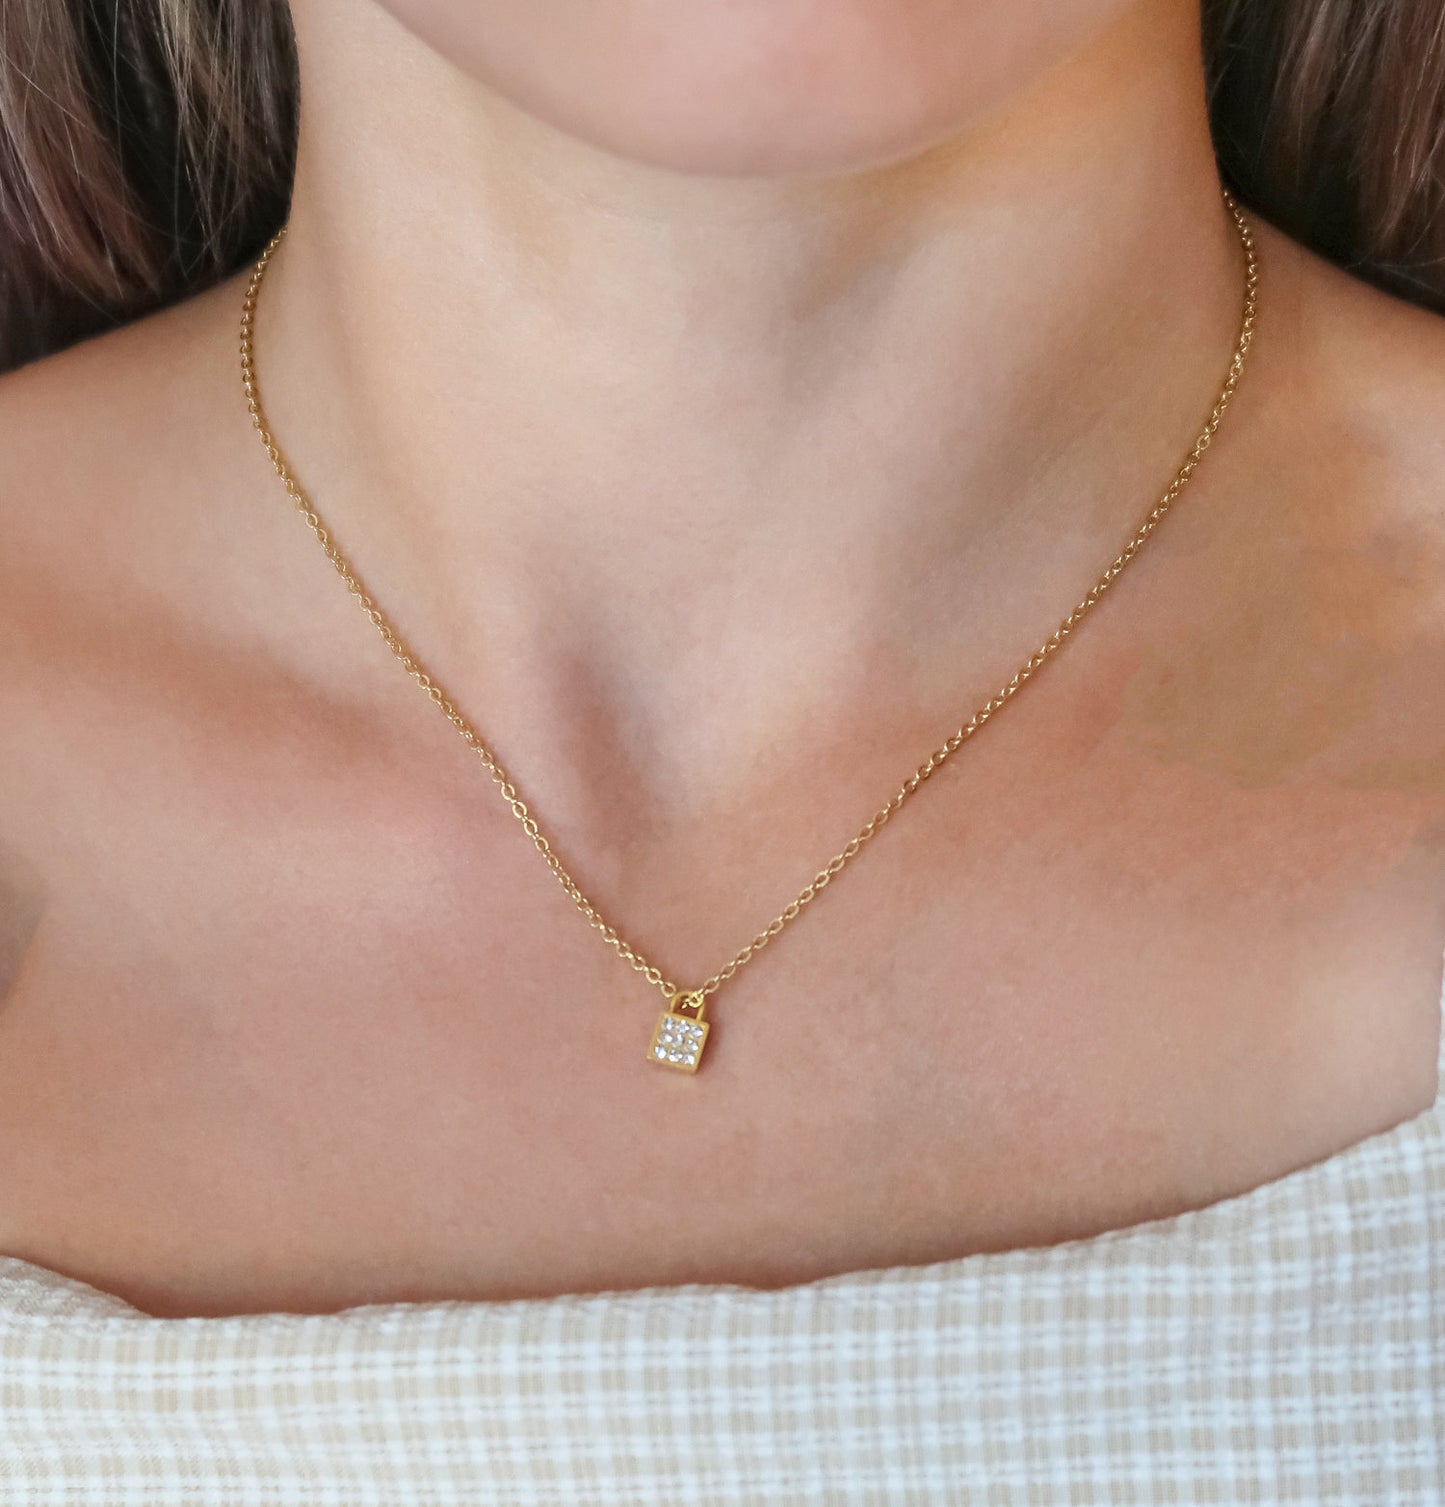 Tiny Lock Necklace, Dainty Necklace, Silver or Gold Jewelry, Layer  Necklace, Gifts for Her, Necklaces for Women, Padlock Necklace